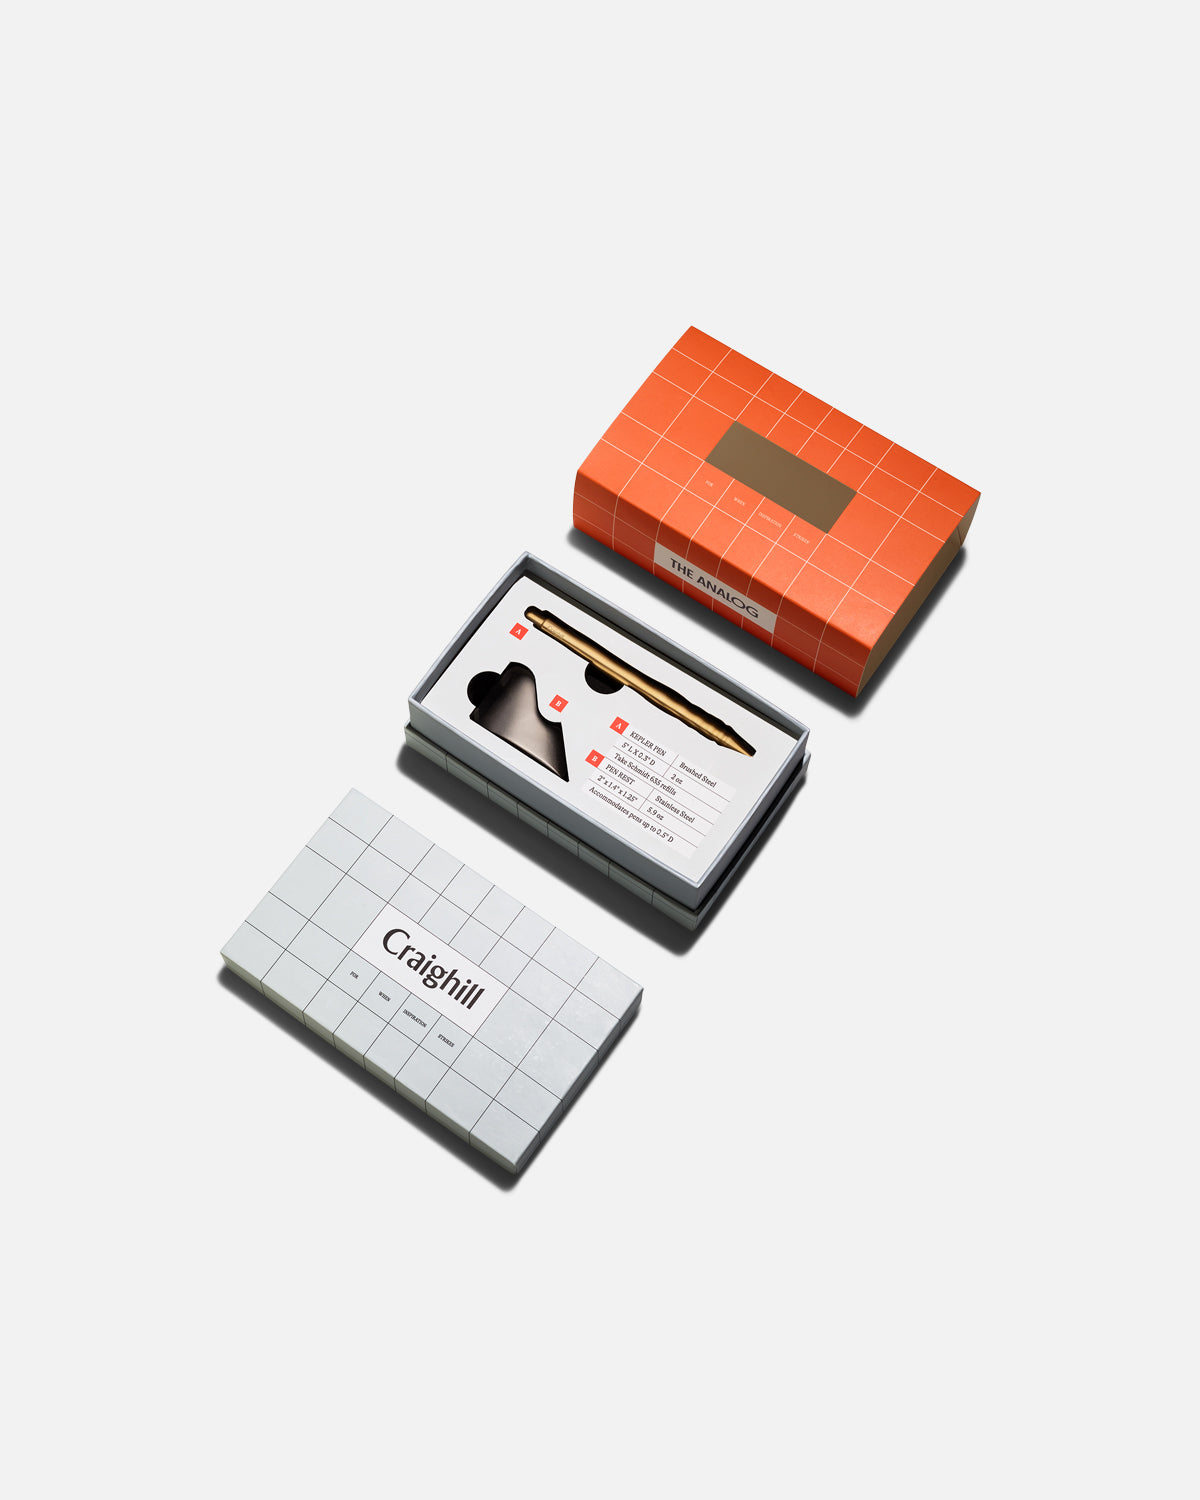 The Analog Gift Box by Craighill